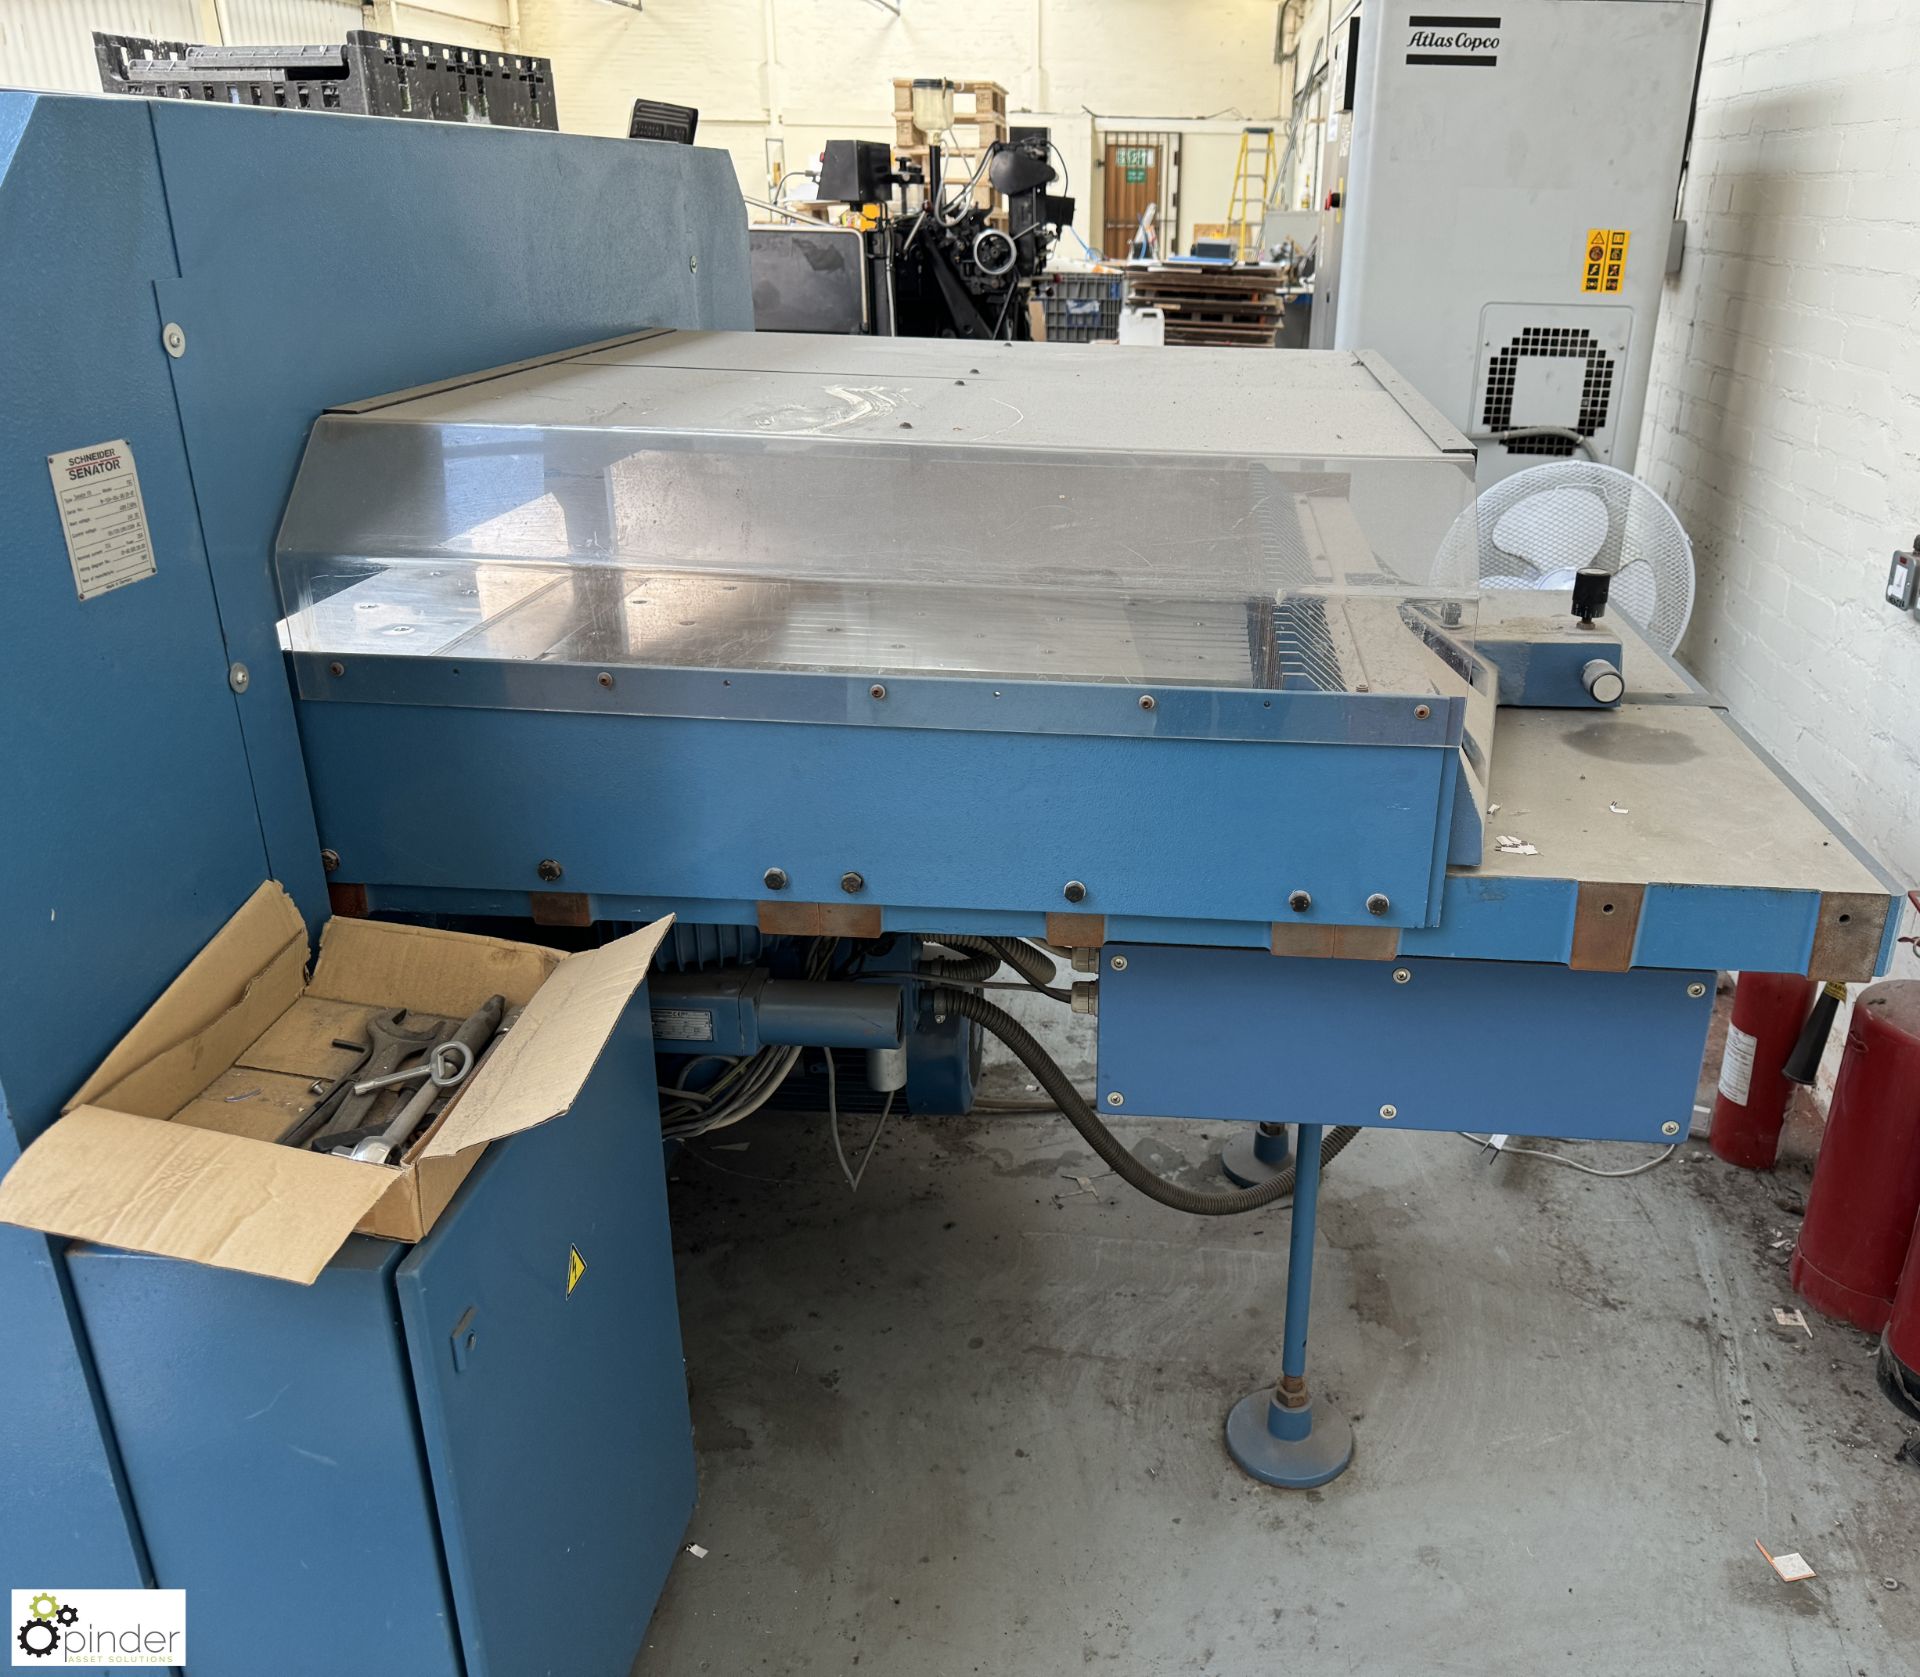 Schneider Senator S-Line 115 TSC Guillotine, 115cm, 400volts, year 1997, serial number M-115H-004- - Image 6 of 14